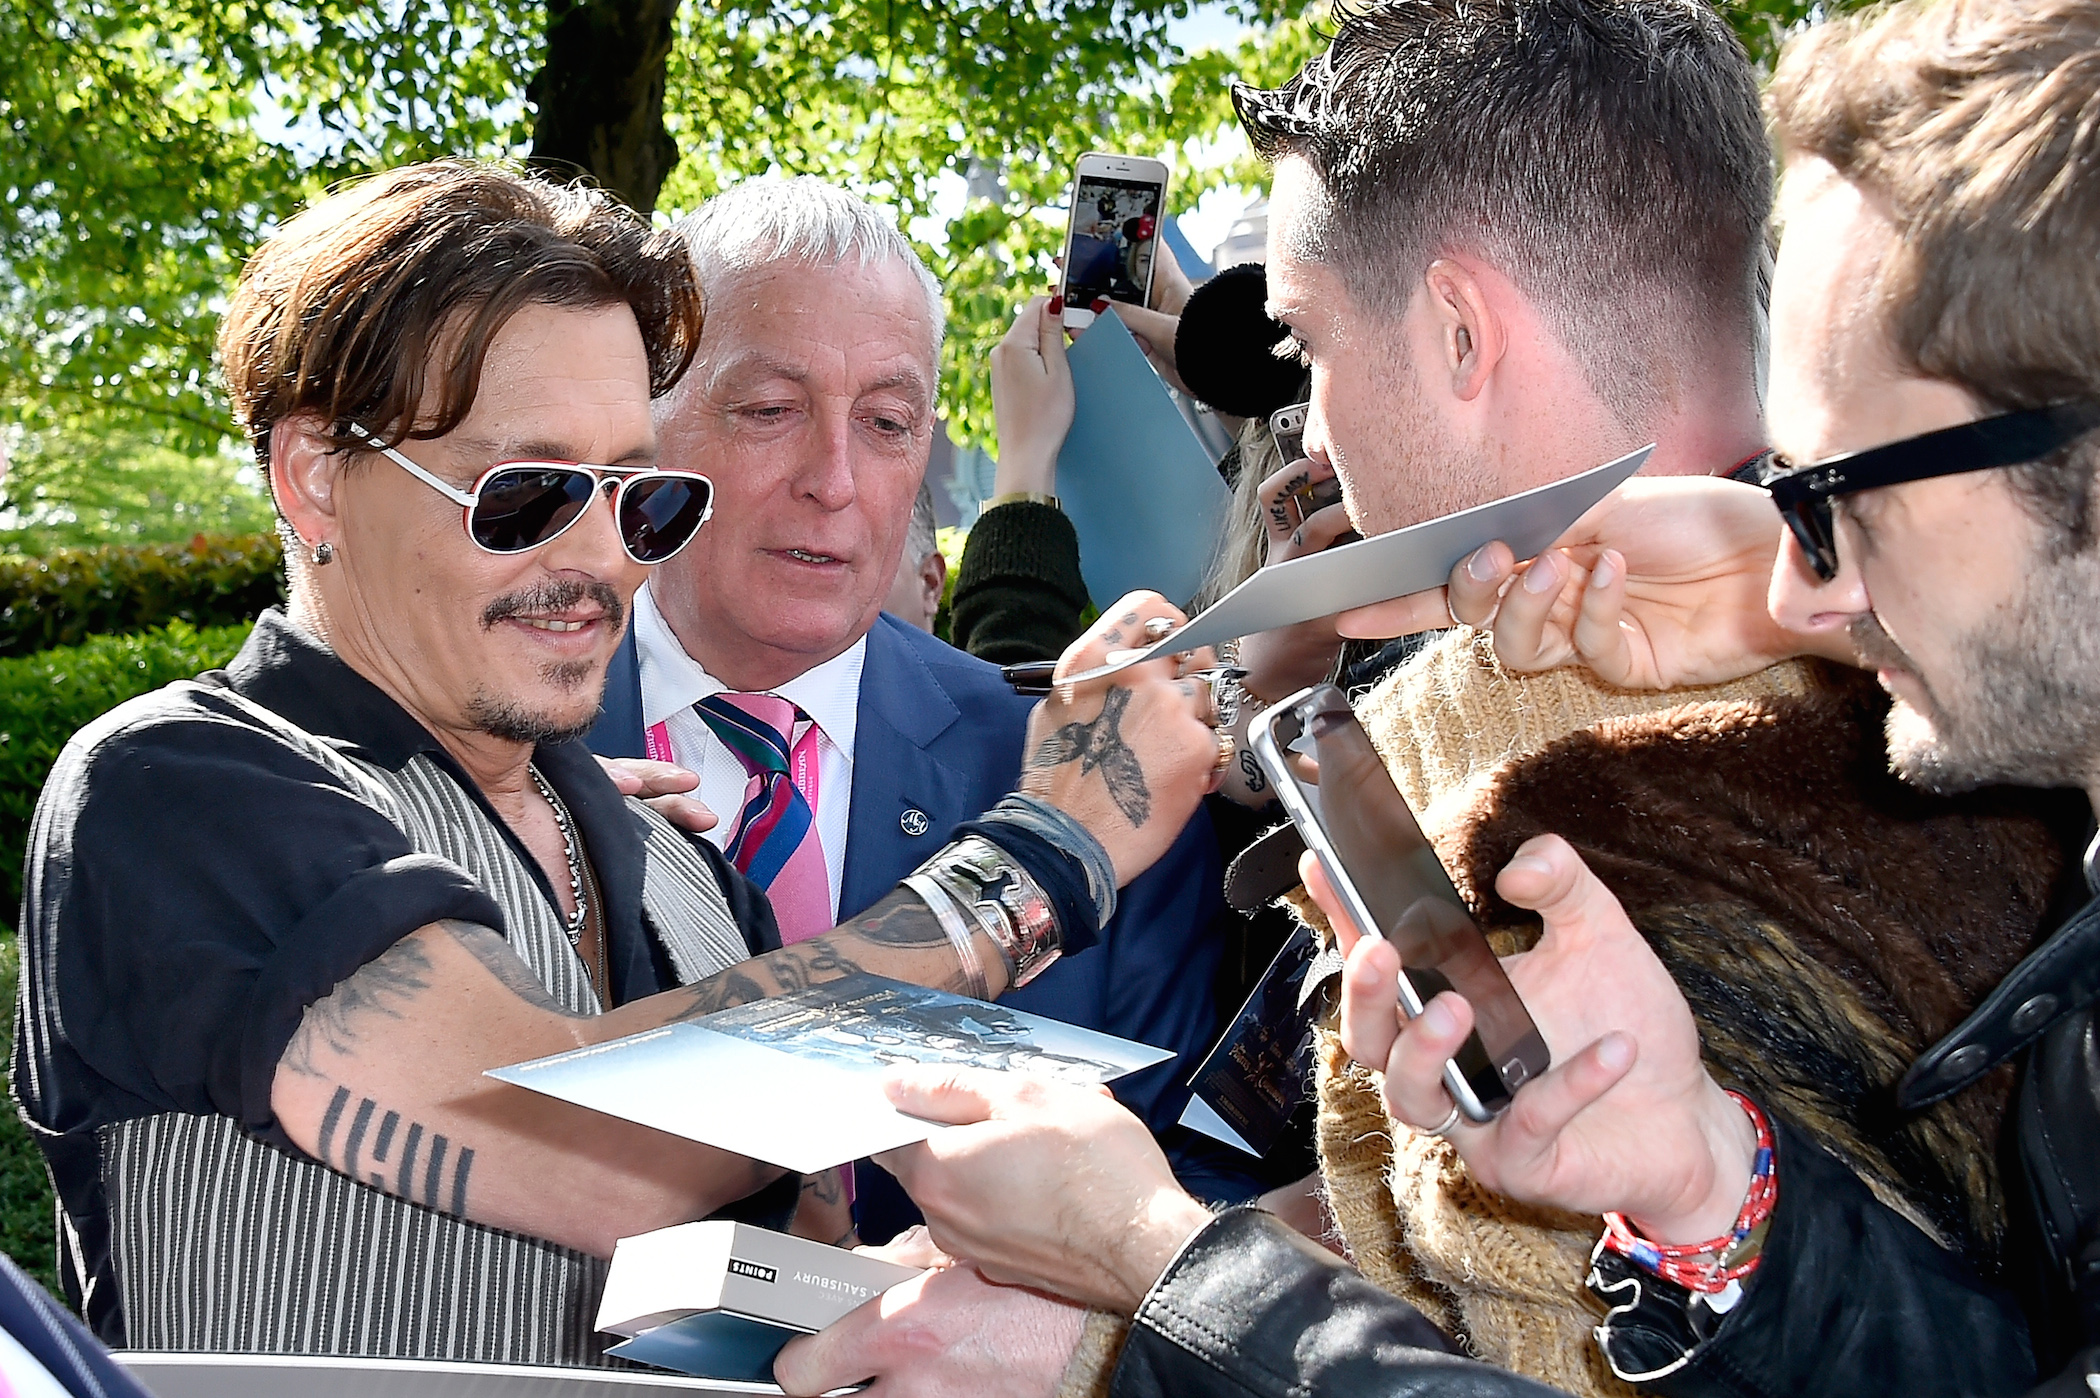 Johnny Depp at the premiere for 'Pirates of the Caribbean: Salazar's Revenge'